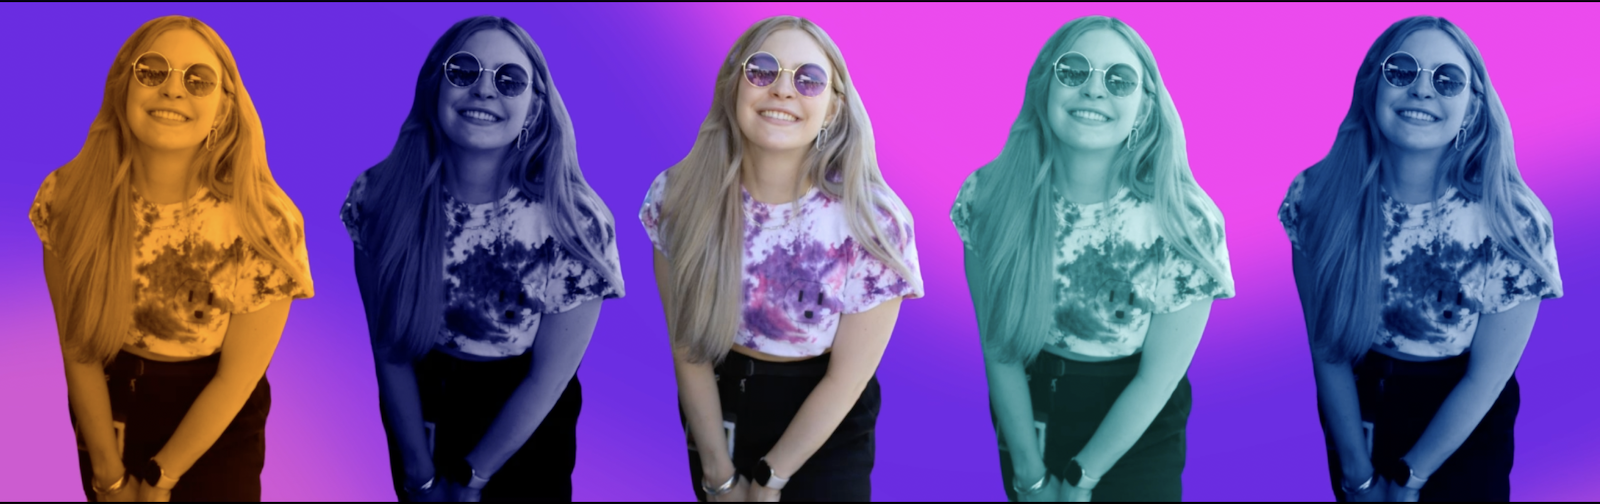 tie dye versions of a smiling woman in sunglasses